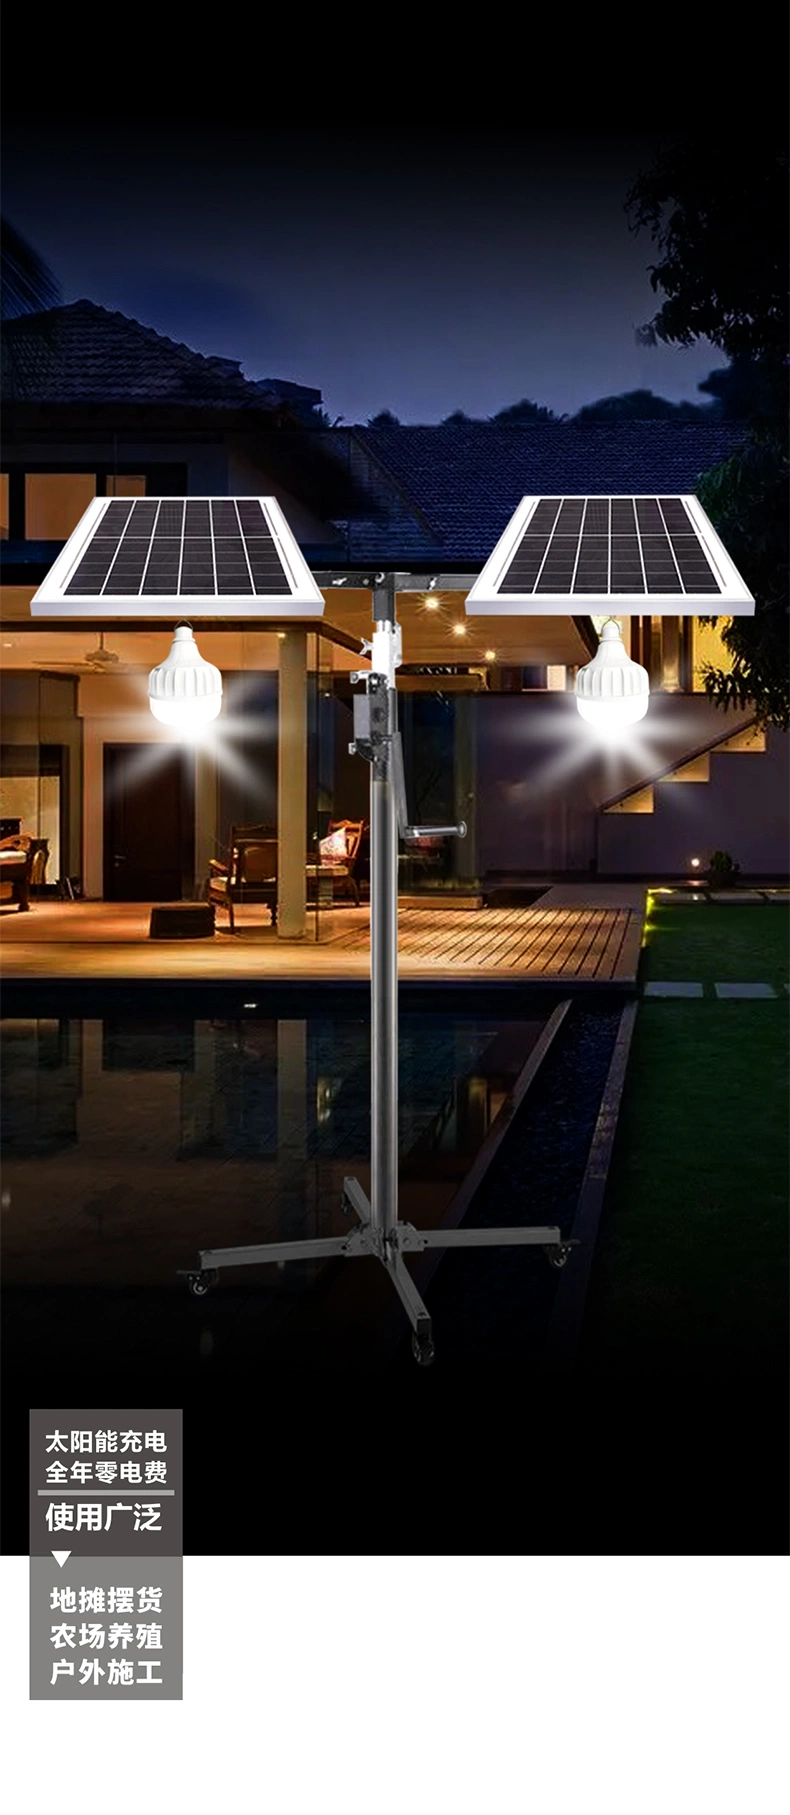 Remote Control Bracket Type Multi-Functional Mosquito Prevention Outdoor Camping Solar Bulb Light